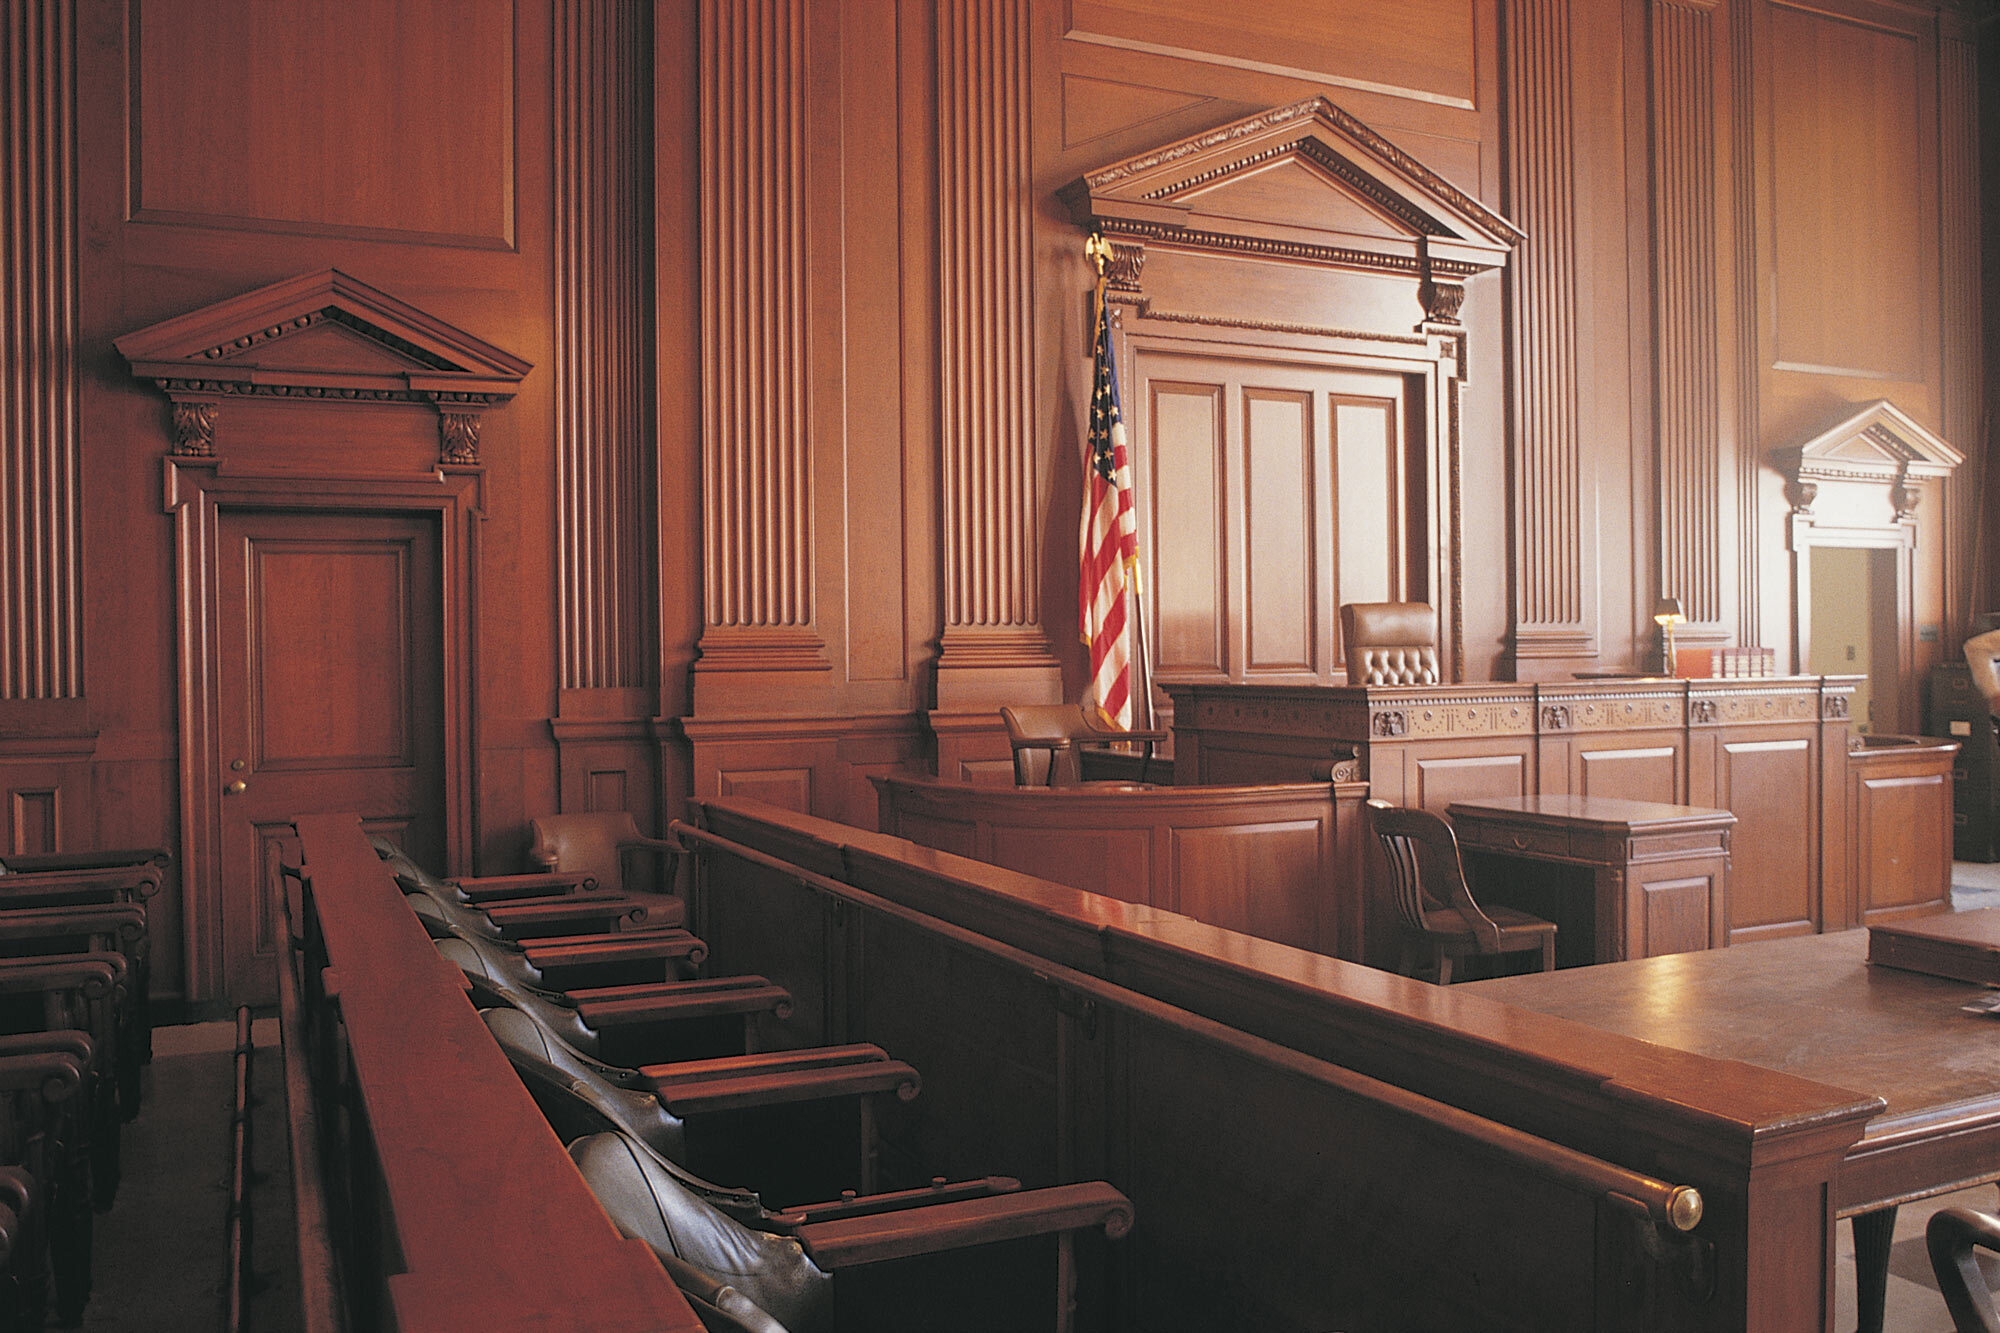 An unoccupied, architecturally striking, wood-paneled courtroom from inside the jury box, facing the Judge's bench.